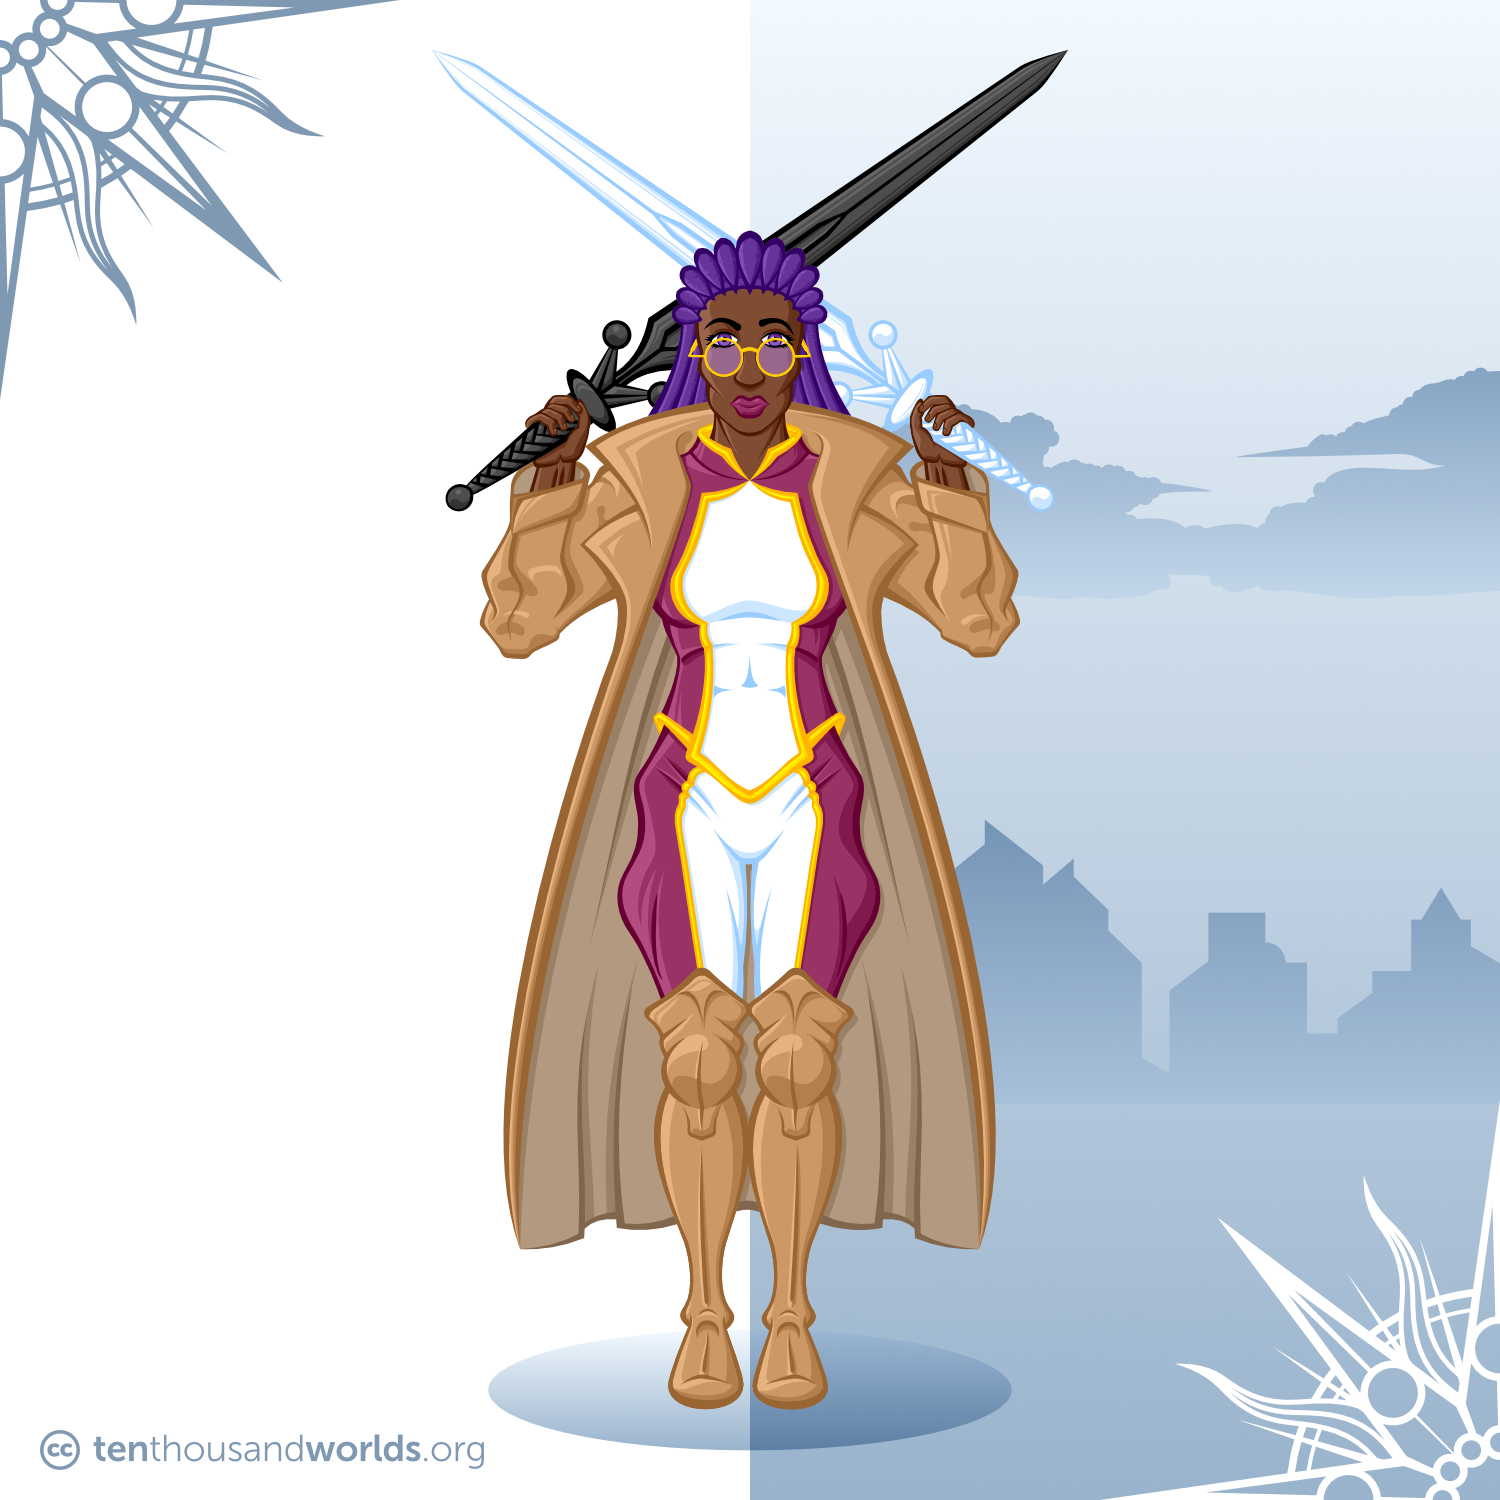 A warrior wearing a double-breasted top and jodhpurs in white and maroon with gold piping, high tan boots, and a long tan coat; sporting violet dreadlocks that gather and tumble down her back; wielding twin swords: one white and one black.